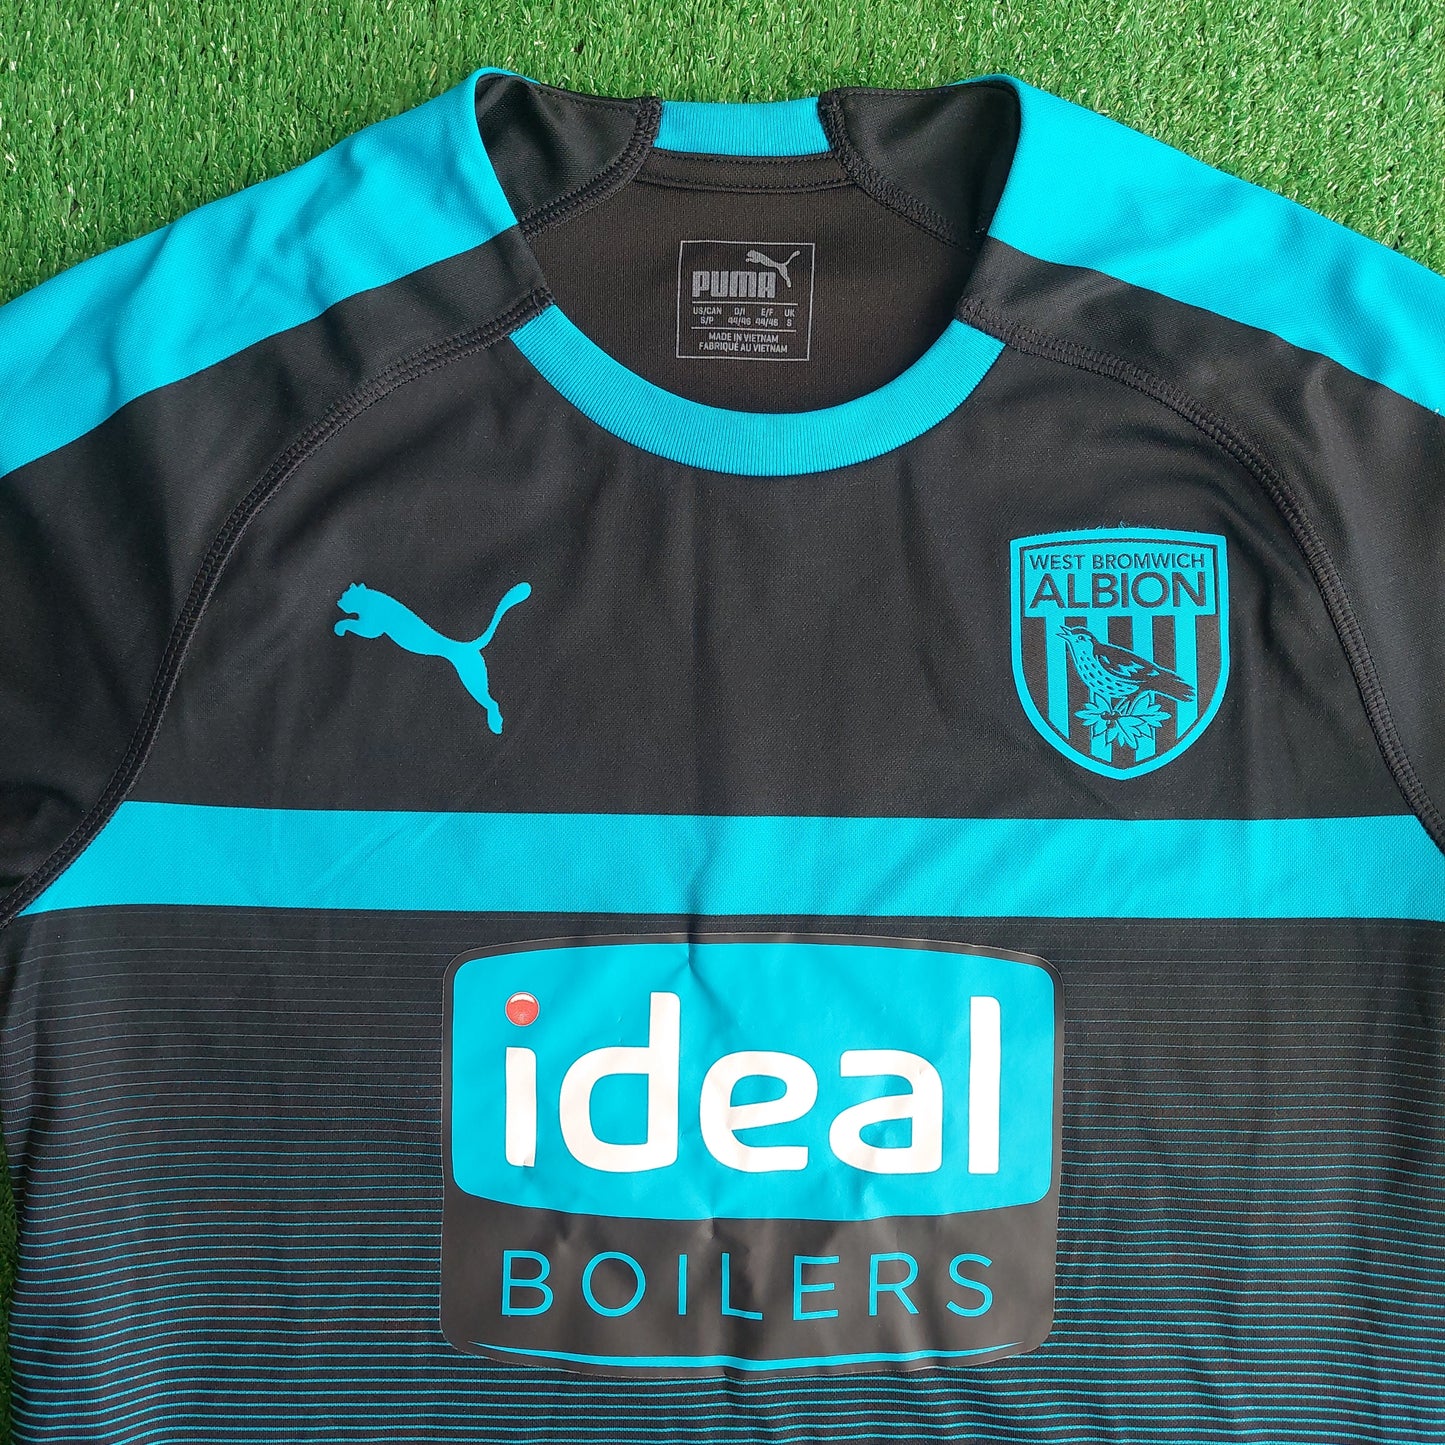 West Bromwich Albion 2018/19 Away Shirt (Very Good) - Size S